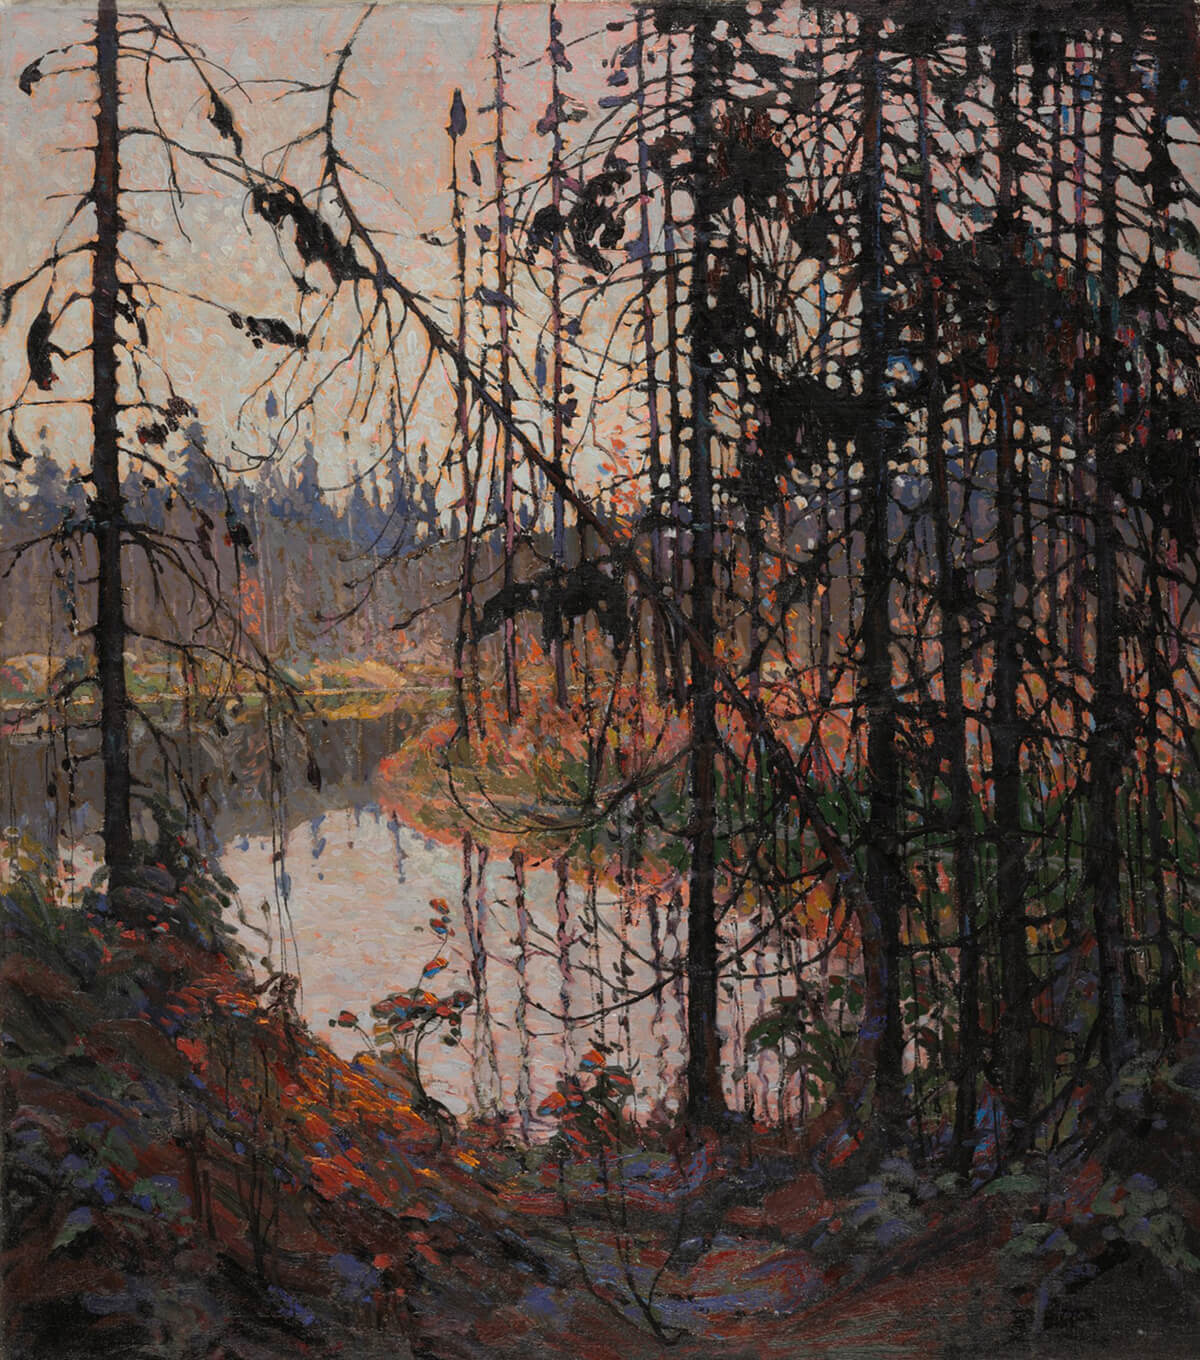 Northern River by Tom Thomson, 1915